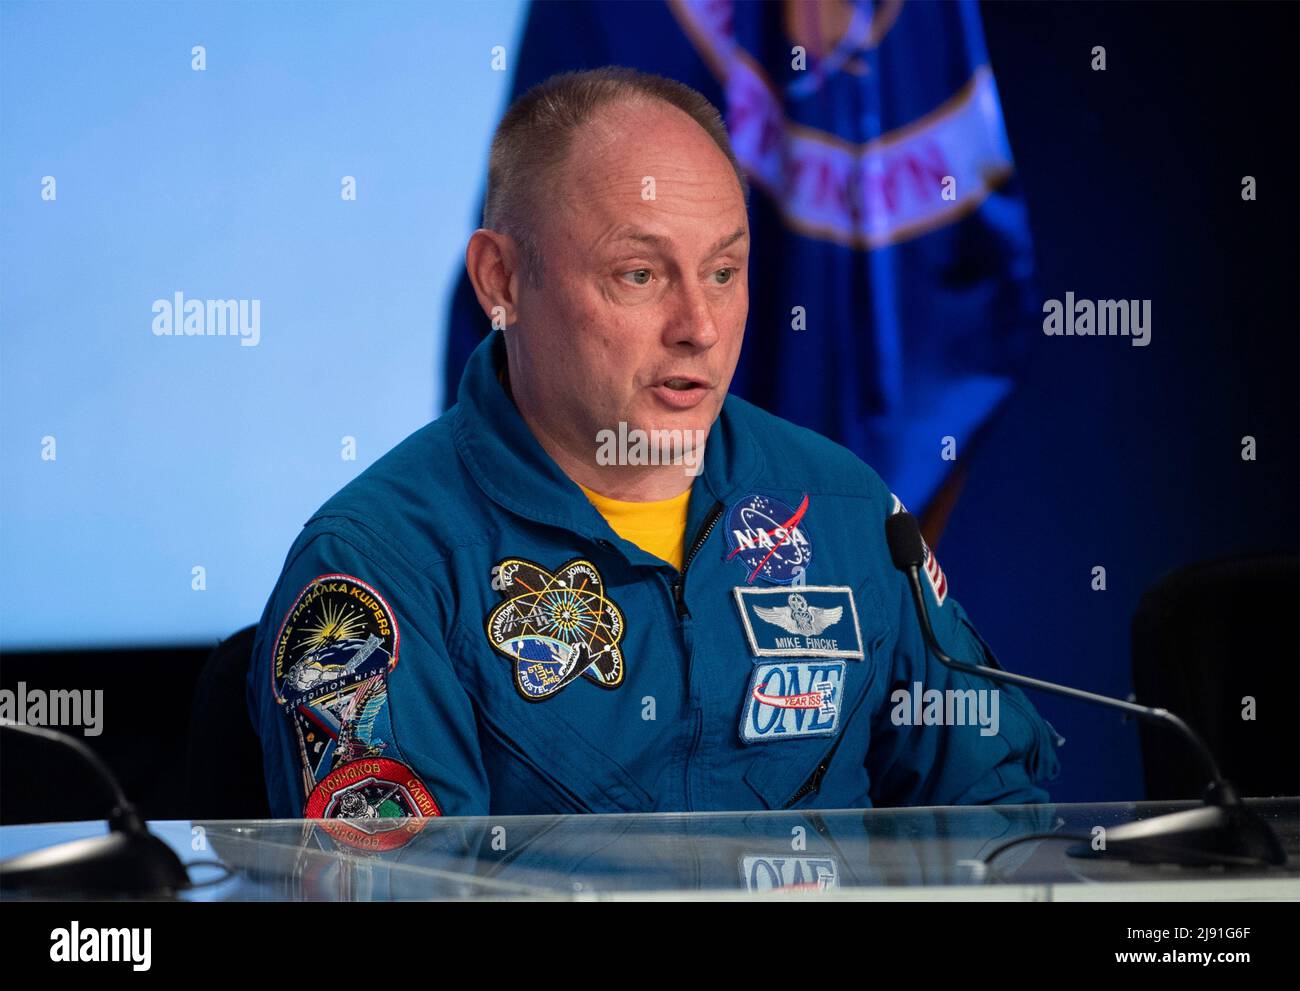 Cape Canaveral, United States of America. 18 May, 2022. NASA astronaut Mike Fincke responds to a question during a press conference ahead of the launch of the United Launch Alliance Atlas V rocket carrying the Boeing CST-100 Starliner spacecraft aboard at the Kennedy Space Center, May 18, 2022 in Cape Canaveral, Florida. The Orbital Flight Test-2 will be second un-crewed flight test and will dock to the International Space Station and is expected to lift off May 19th. Credit: Joel Kowsky/NASA/Alamy Live News Stock Photo